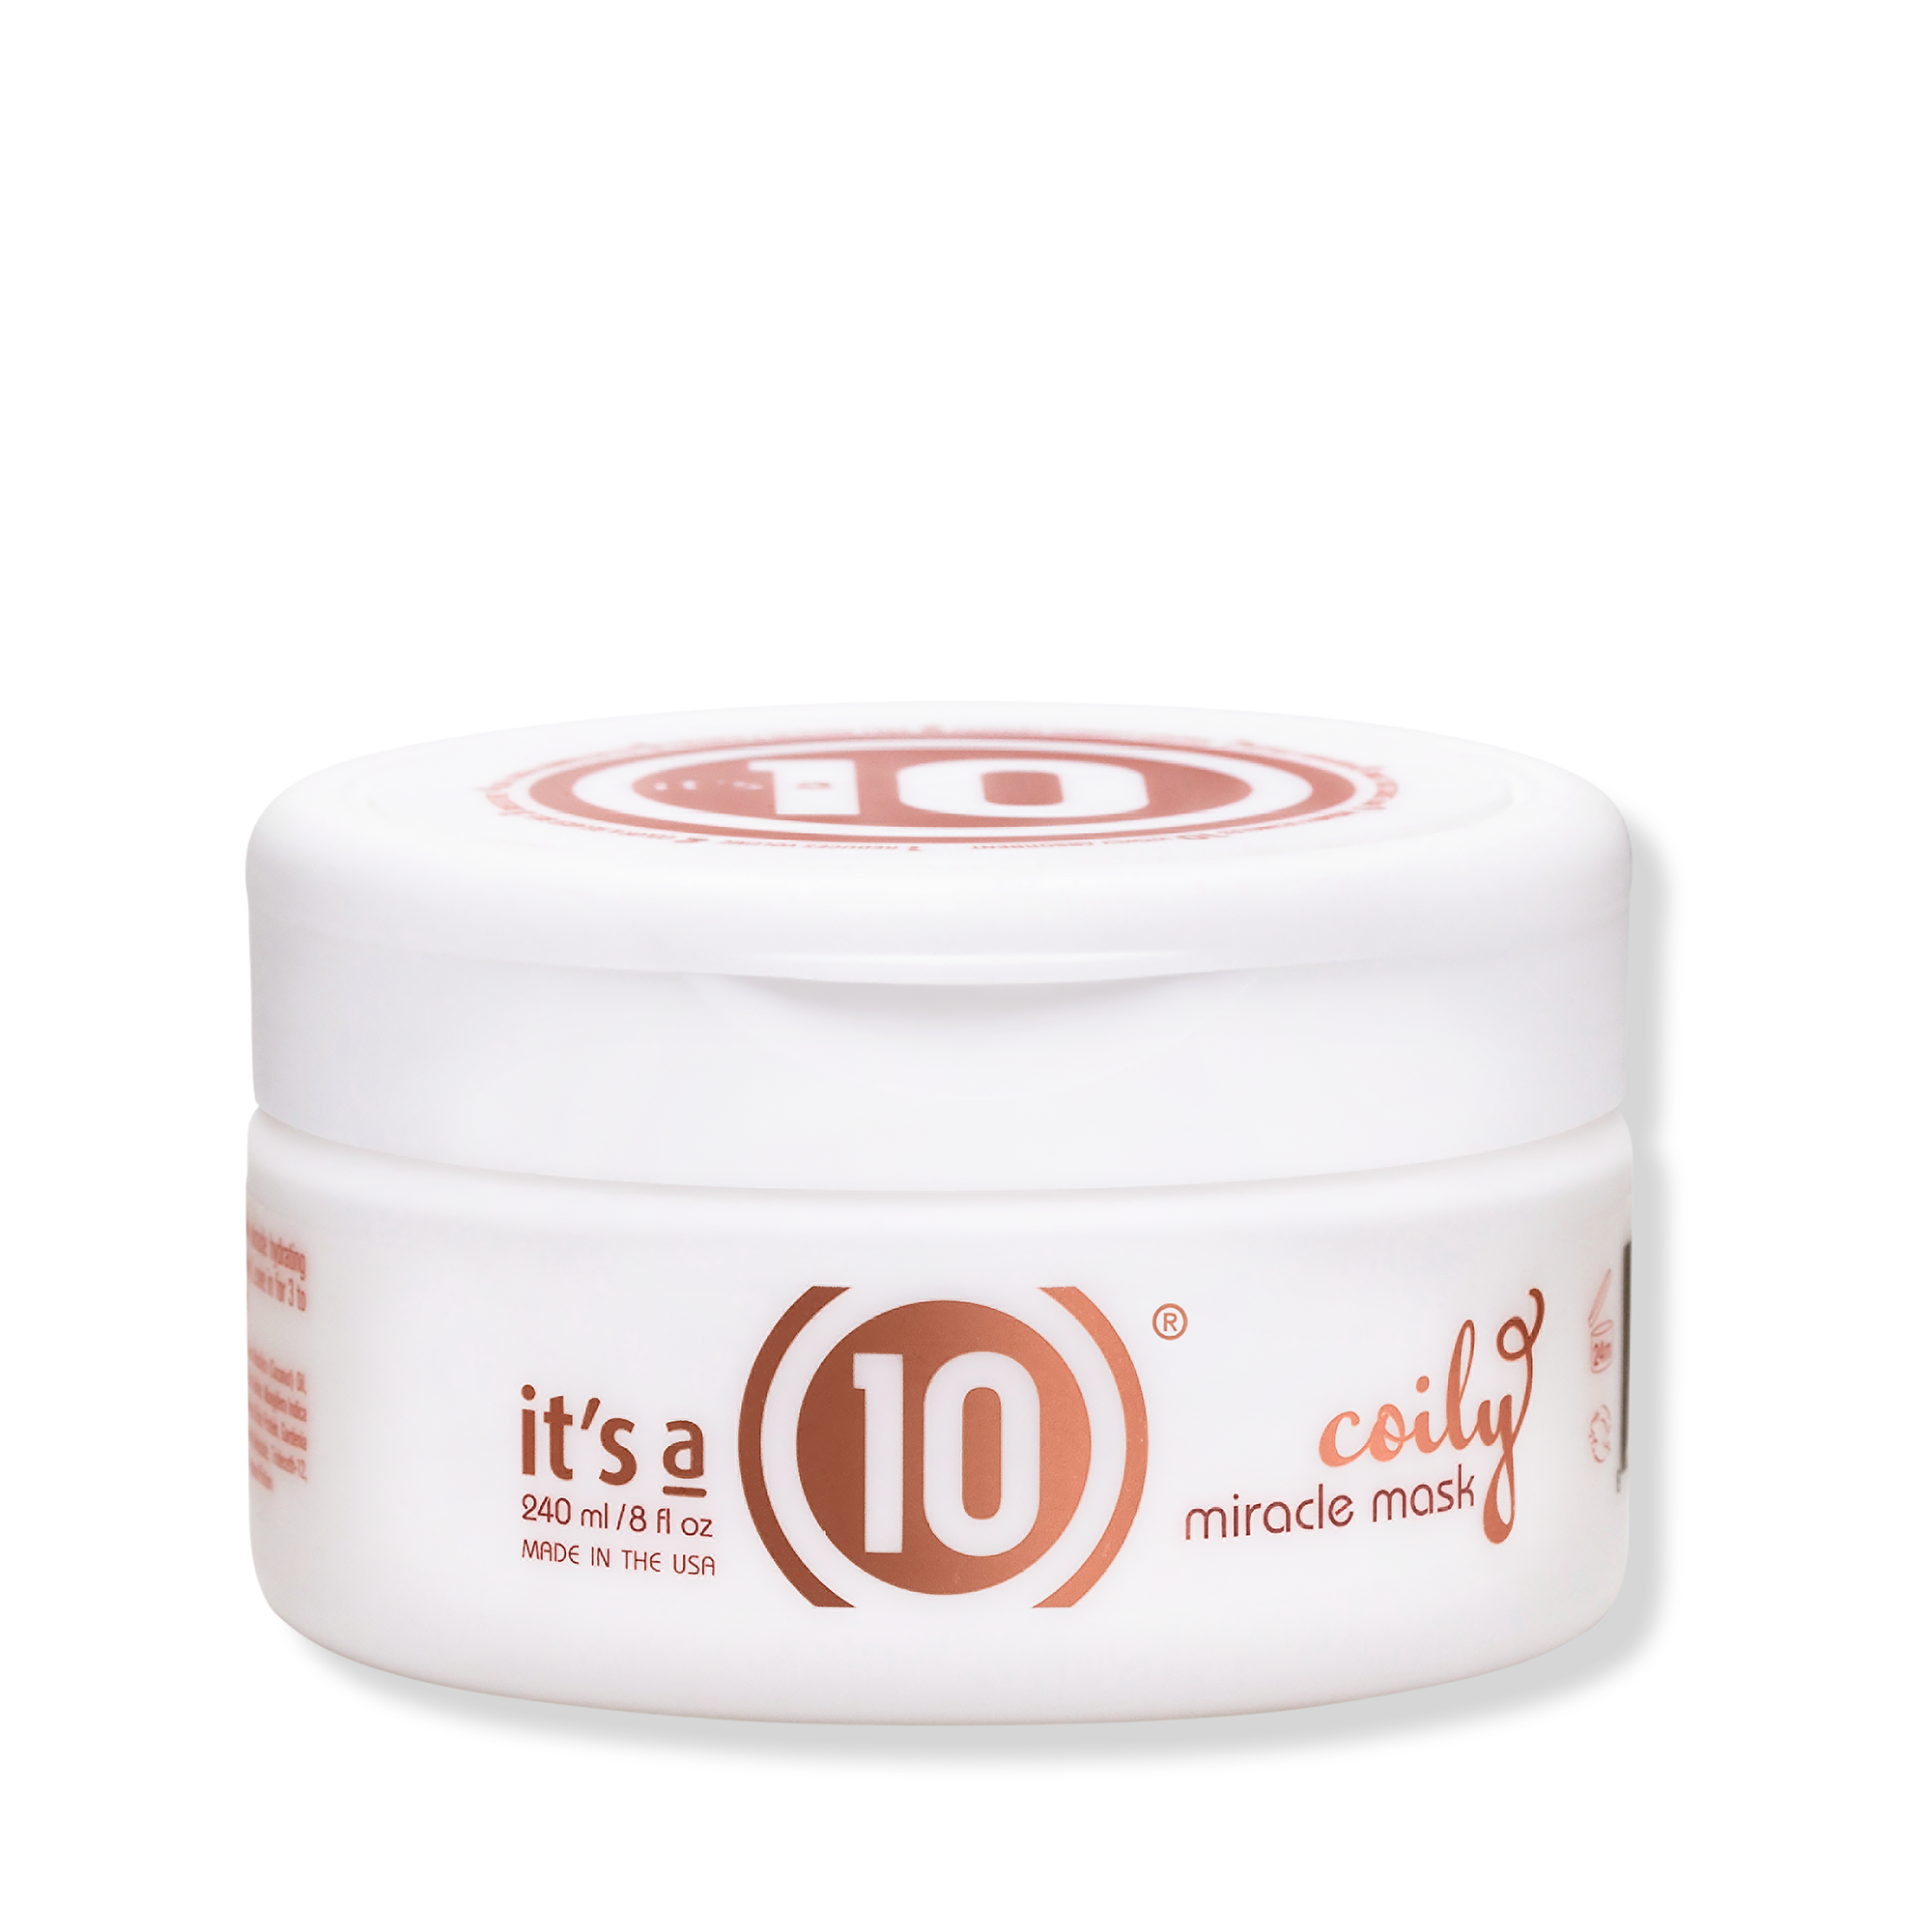 It's A 10 Miracle Coily Hair Mask - 8oz / 8OZ